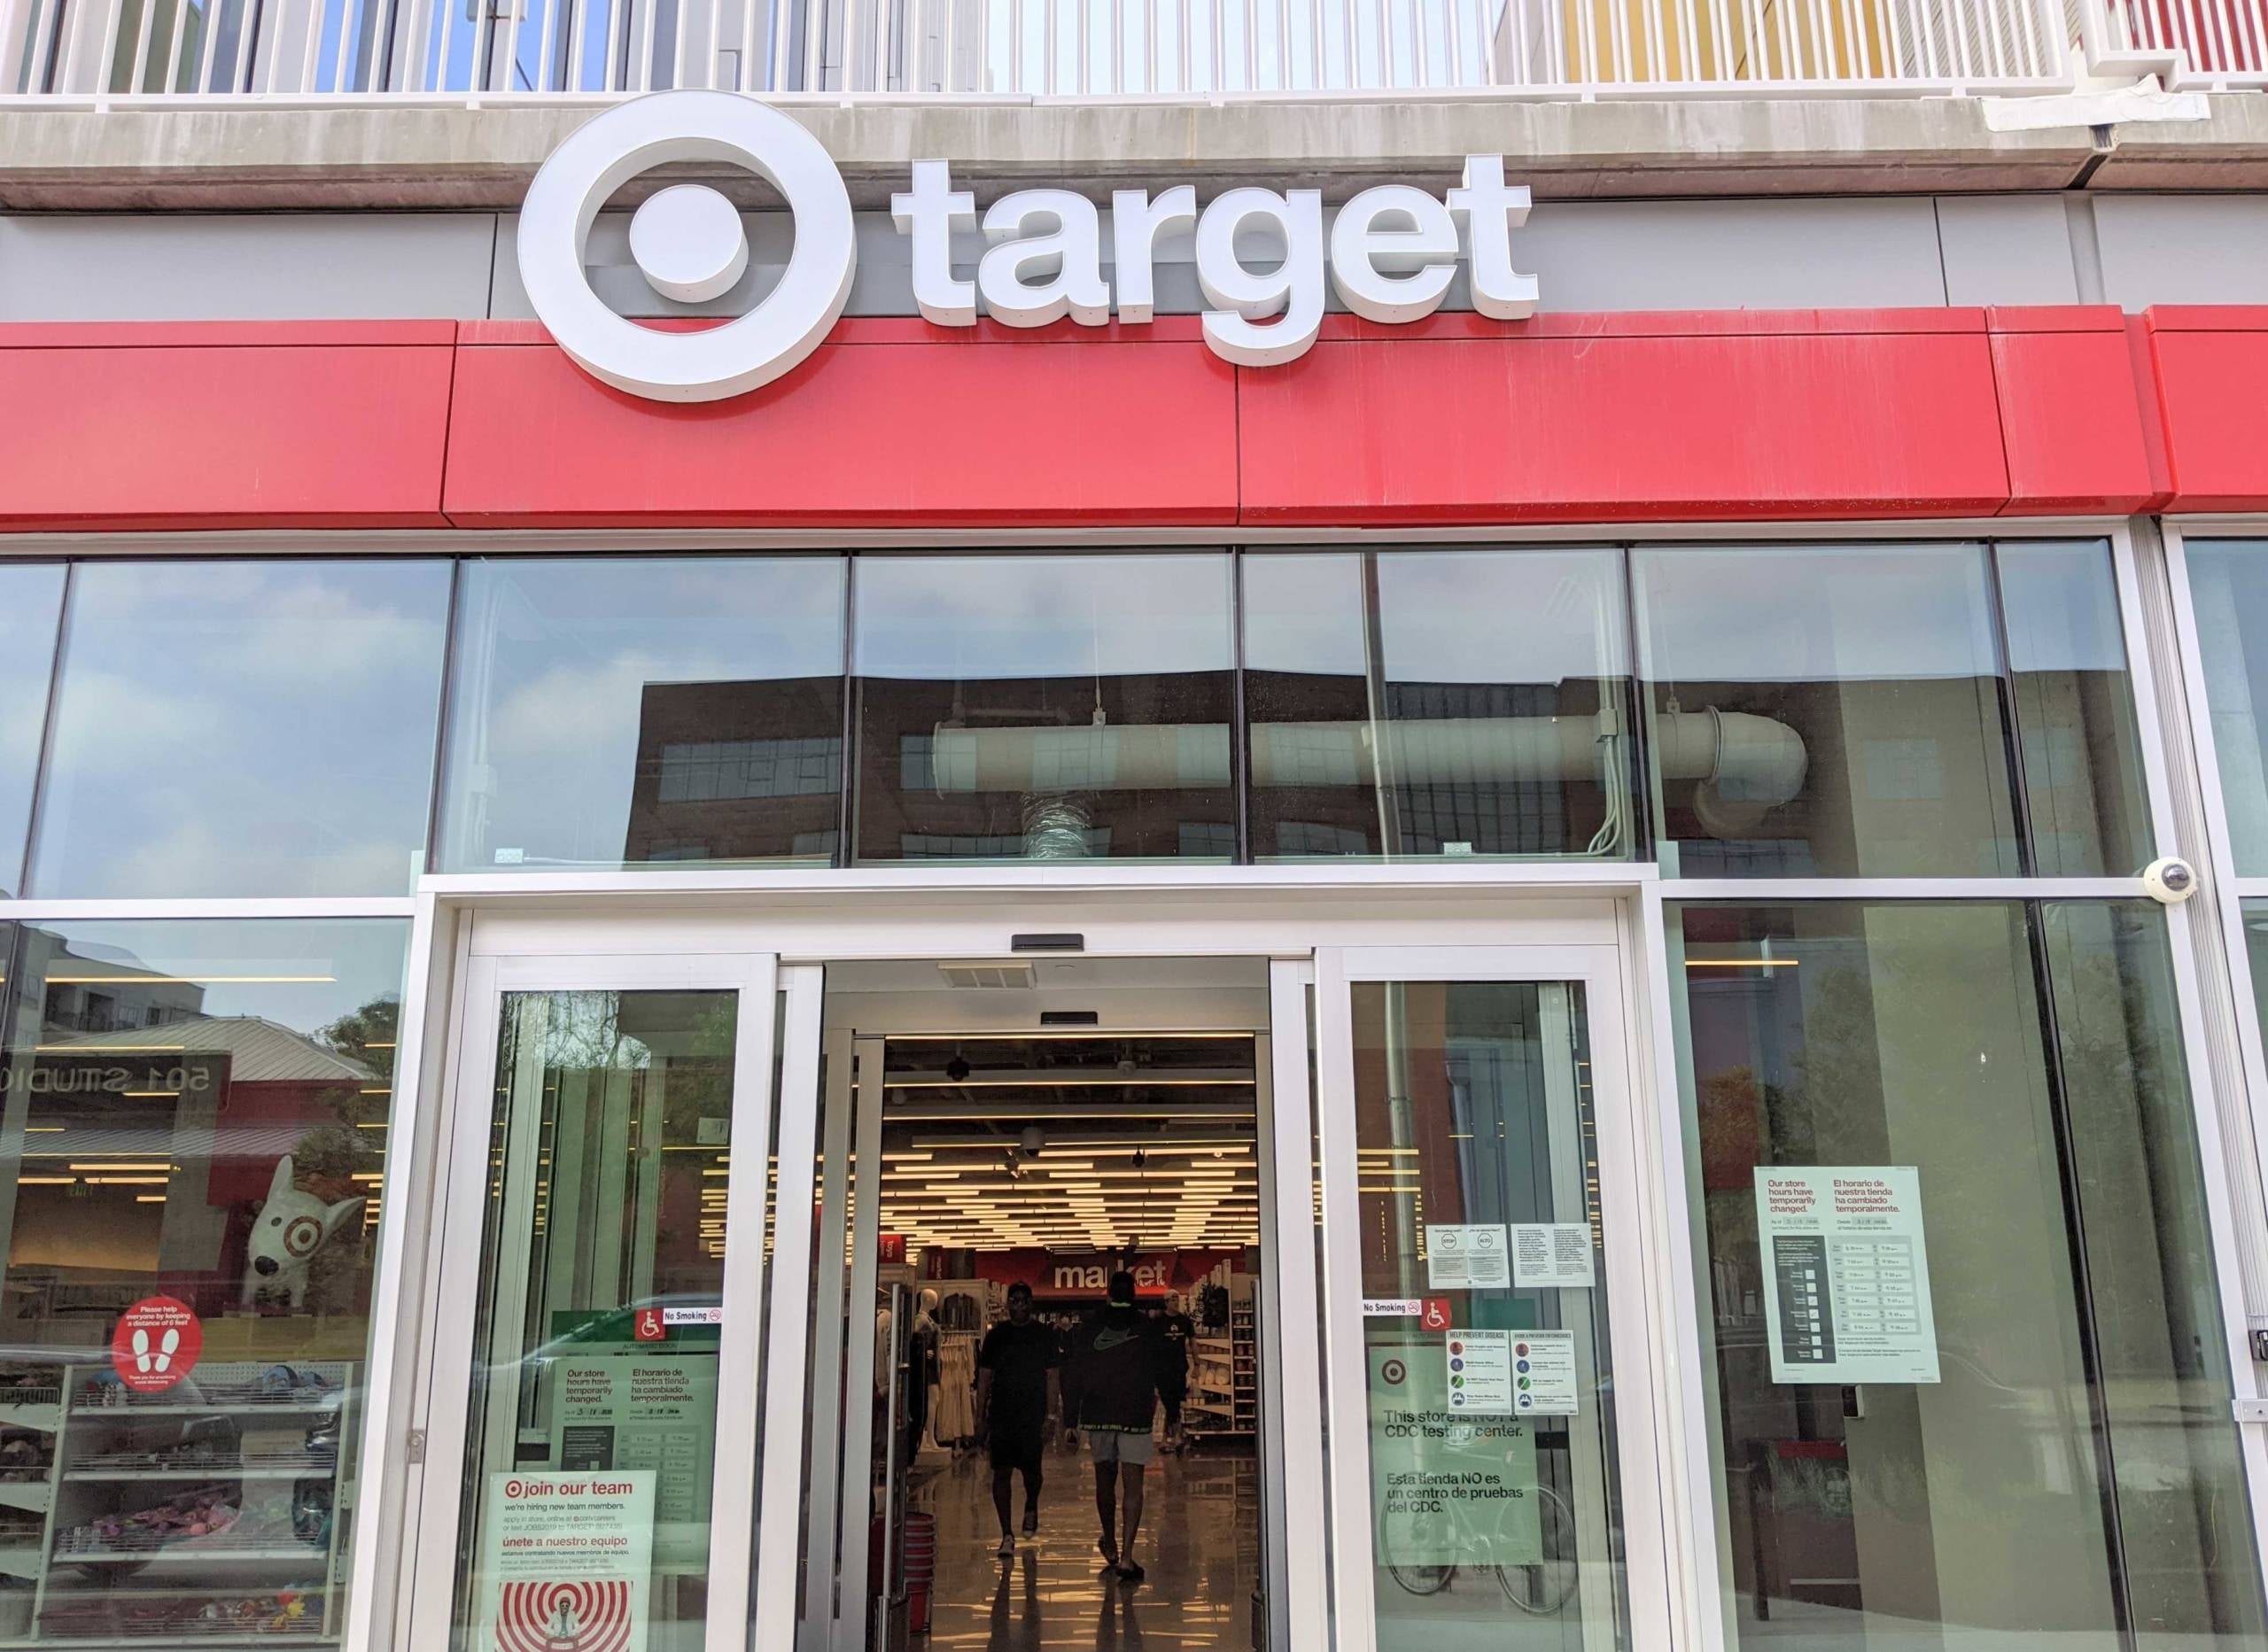 An image of the front of a Target store.